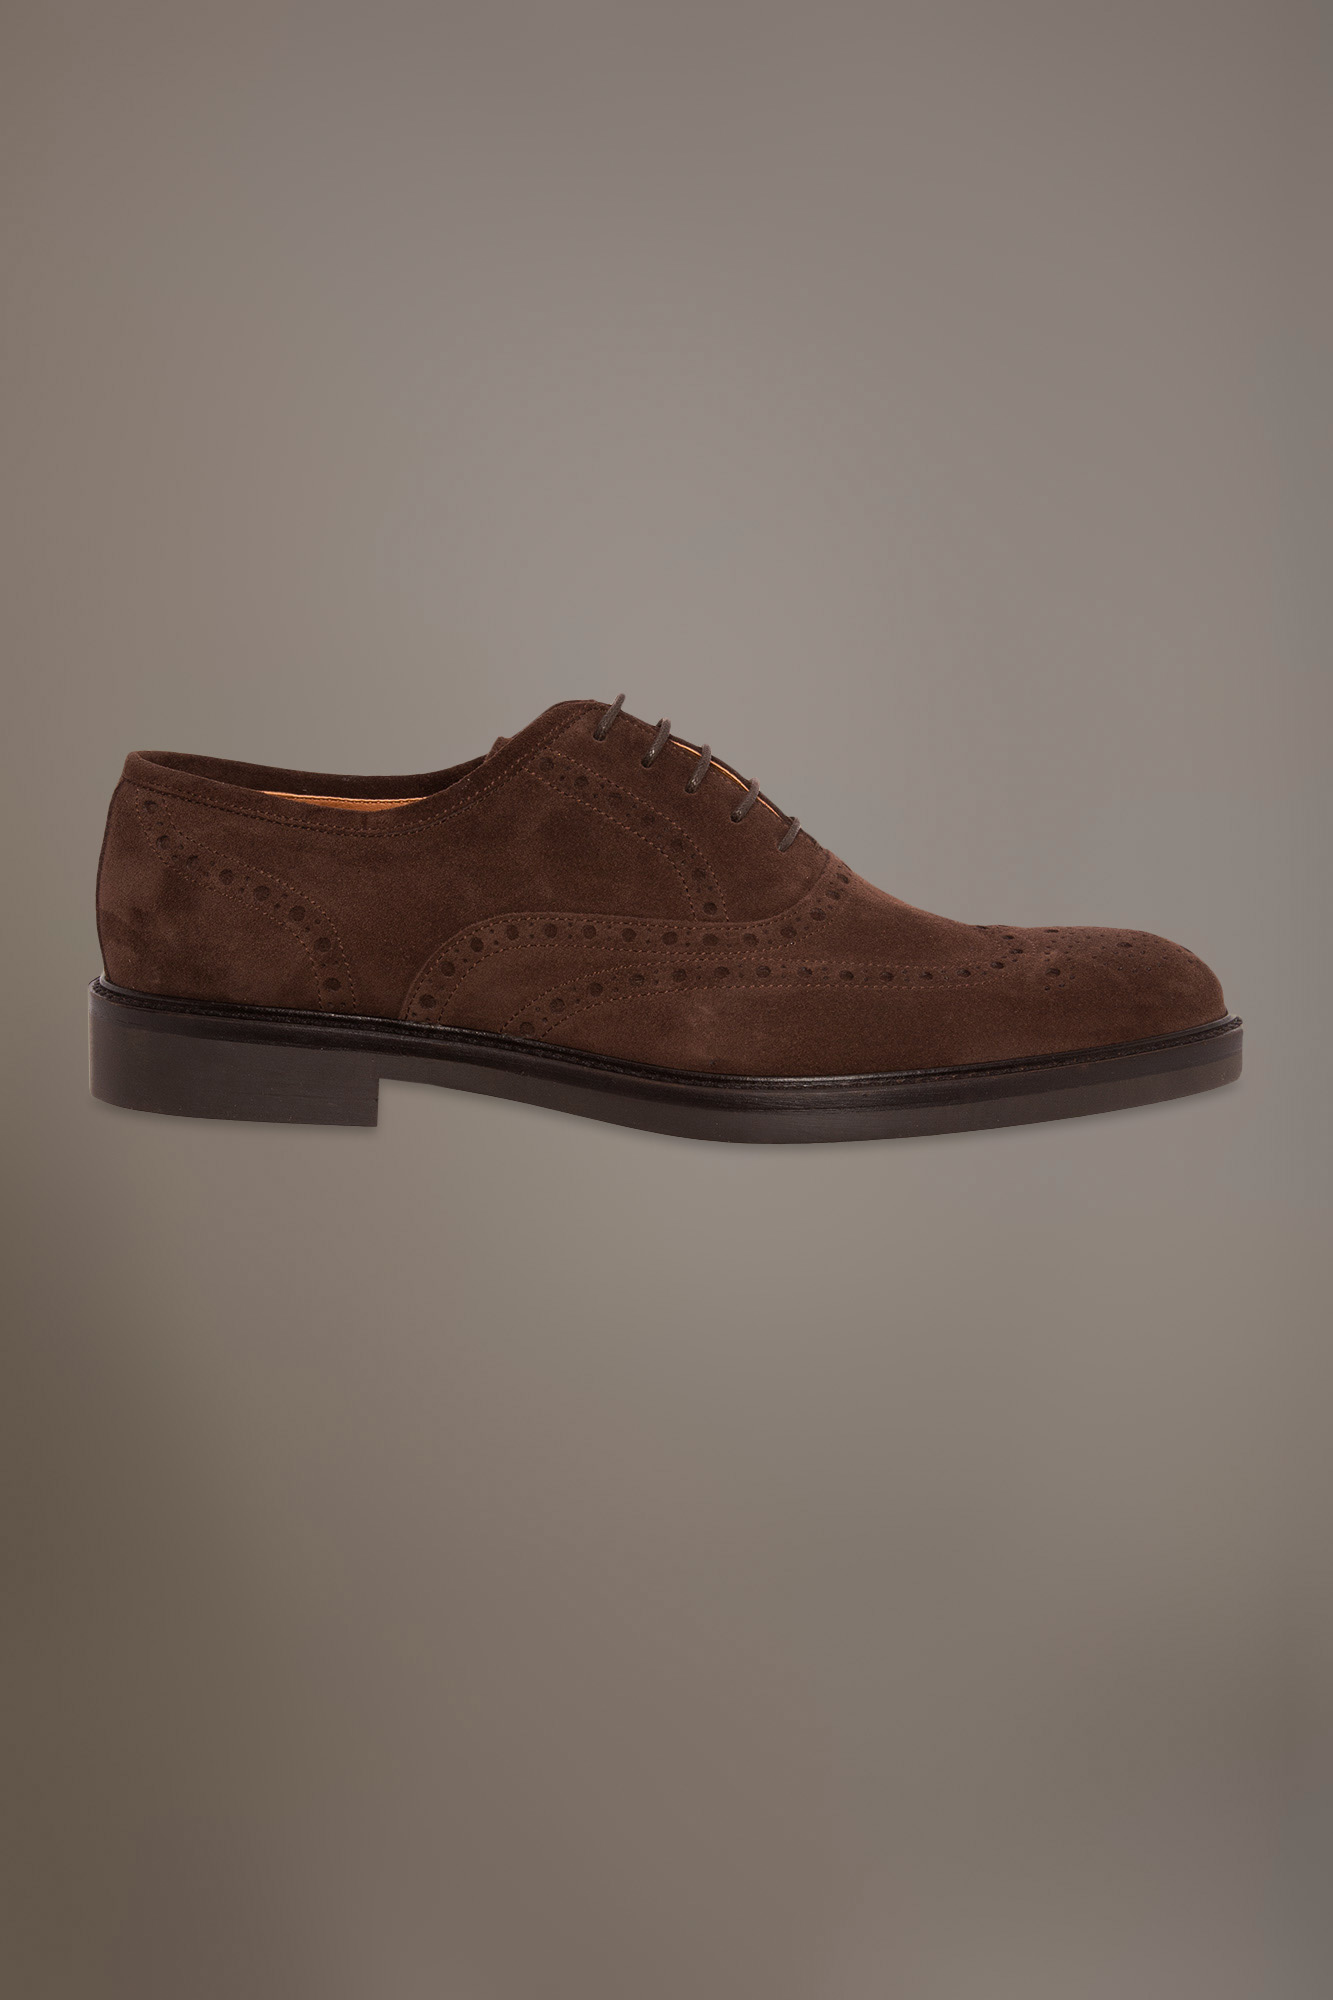 Oxford brouge shoes - 100% leather - suede image number null